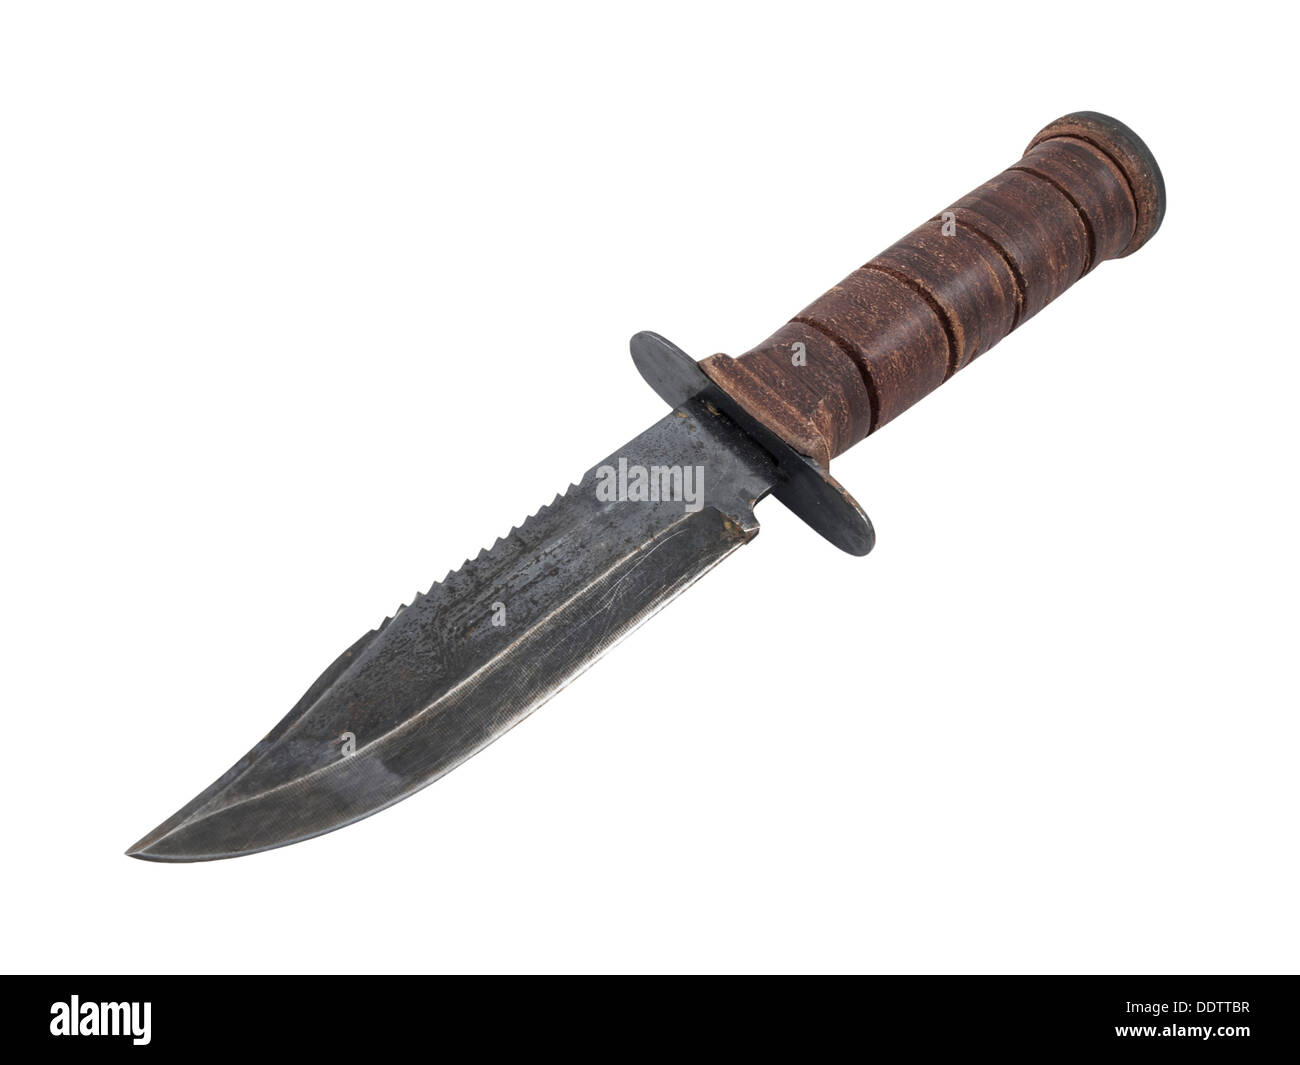 Rusty old hunting knife with leather handle isolated with clipping path. Stock Photo